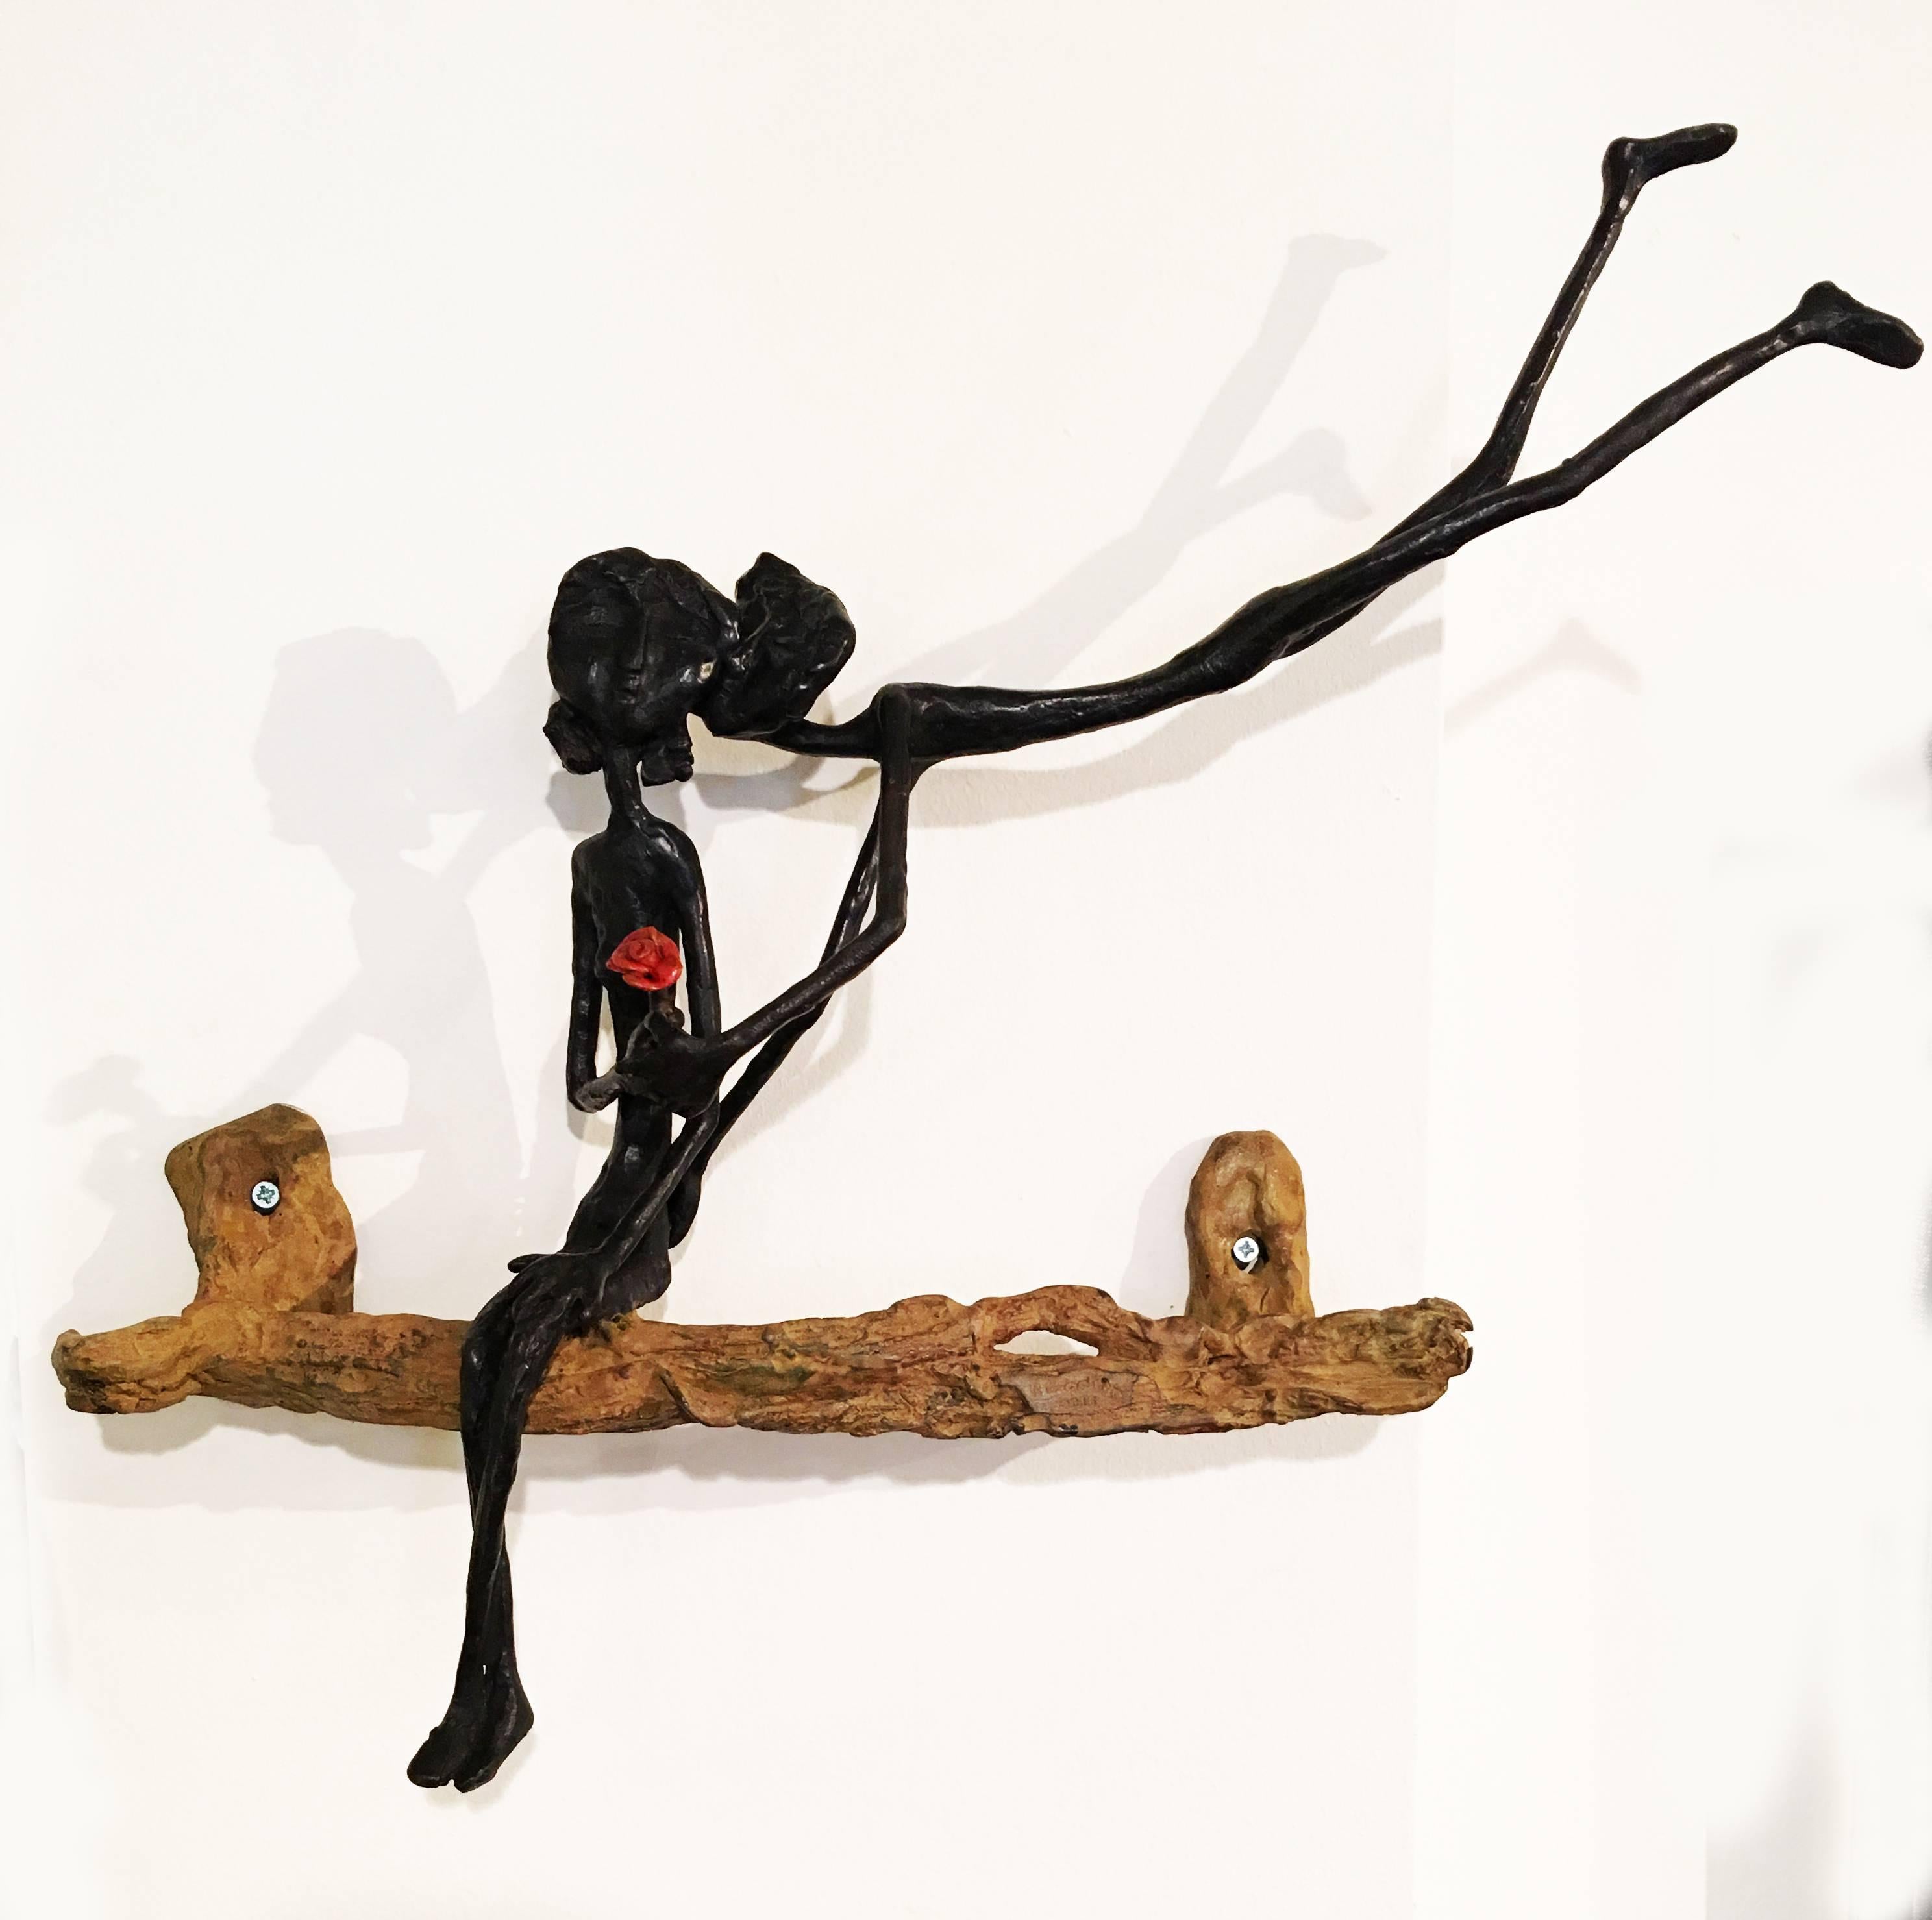 Ruth Bloch Figurative Sculpture - Blossoming Love, Flying with Red Flower, Unique Bronze Sculpture